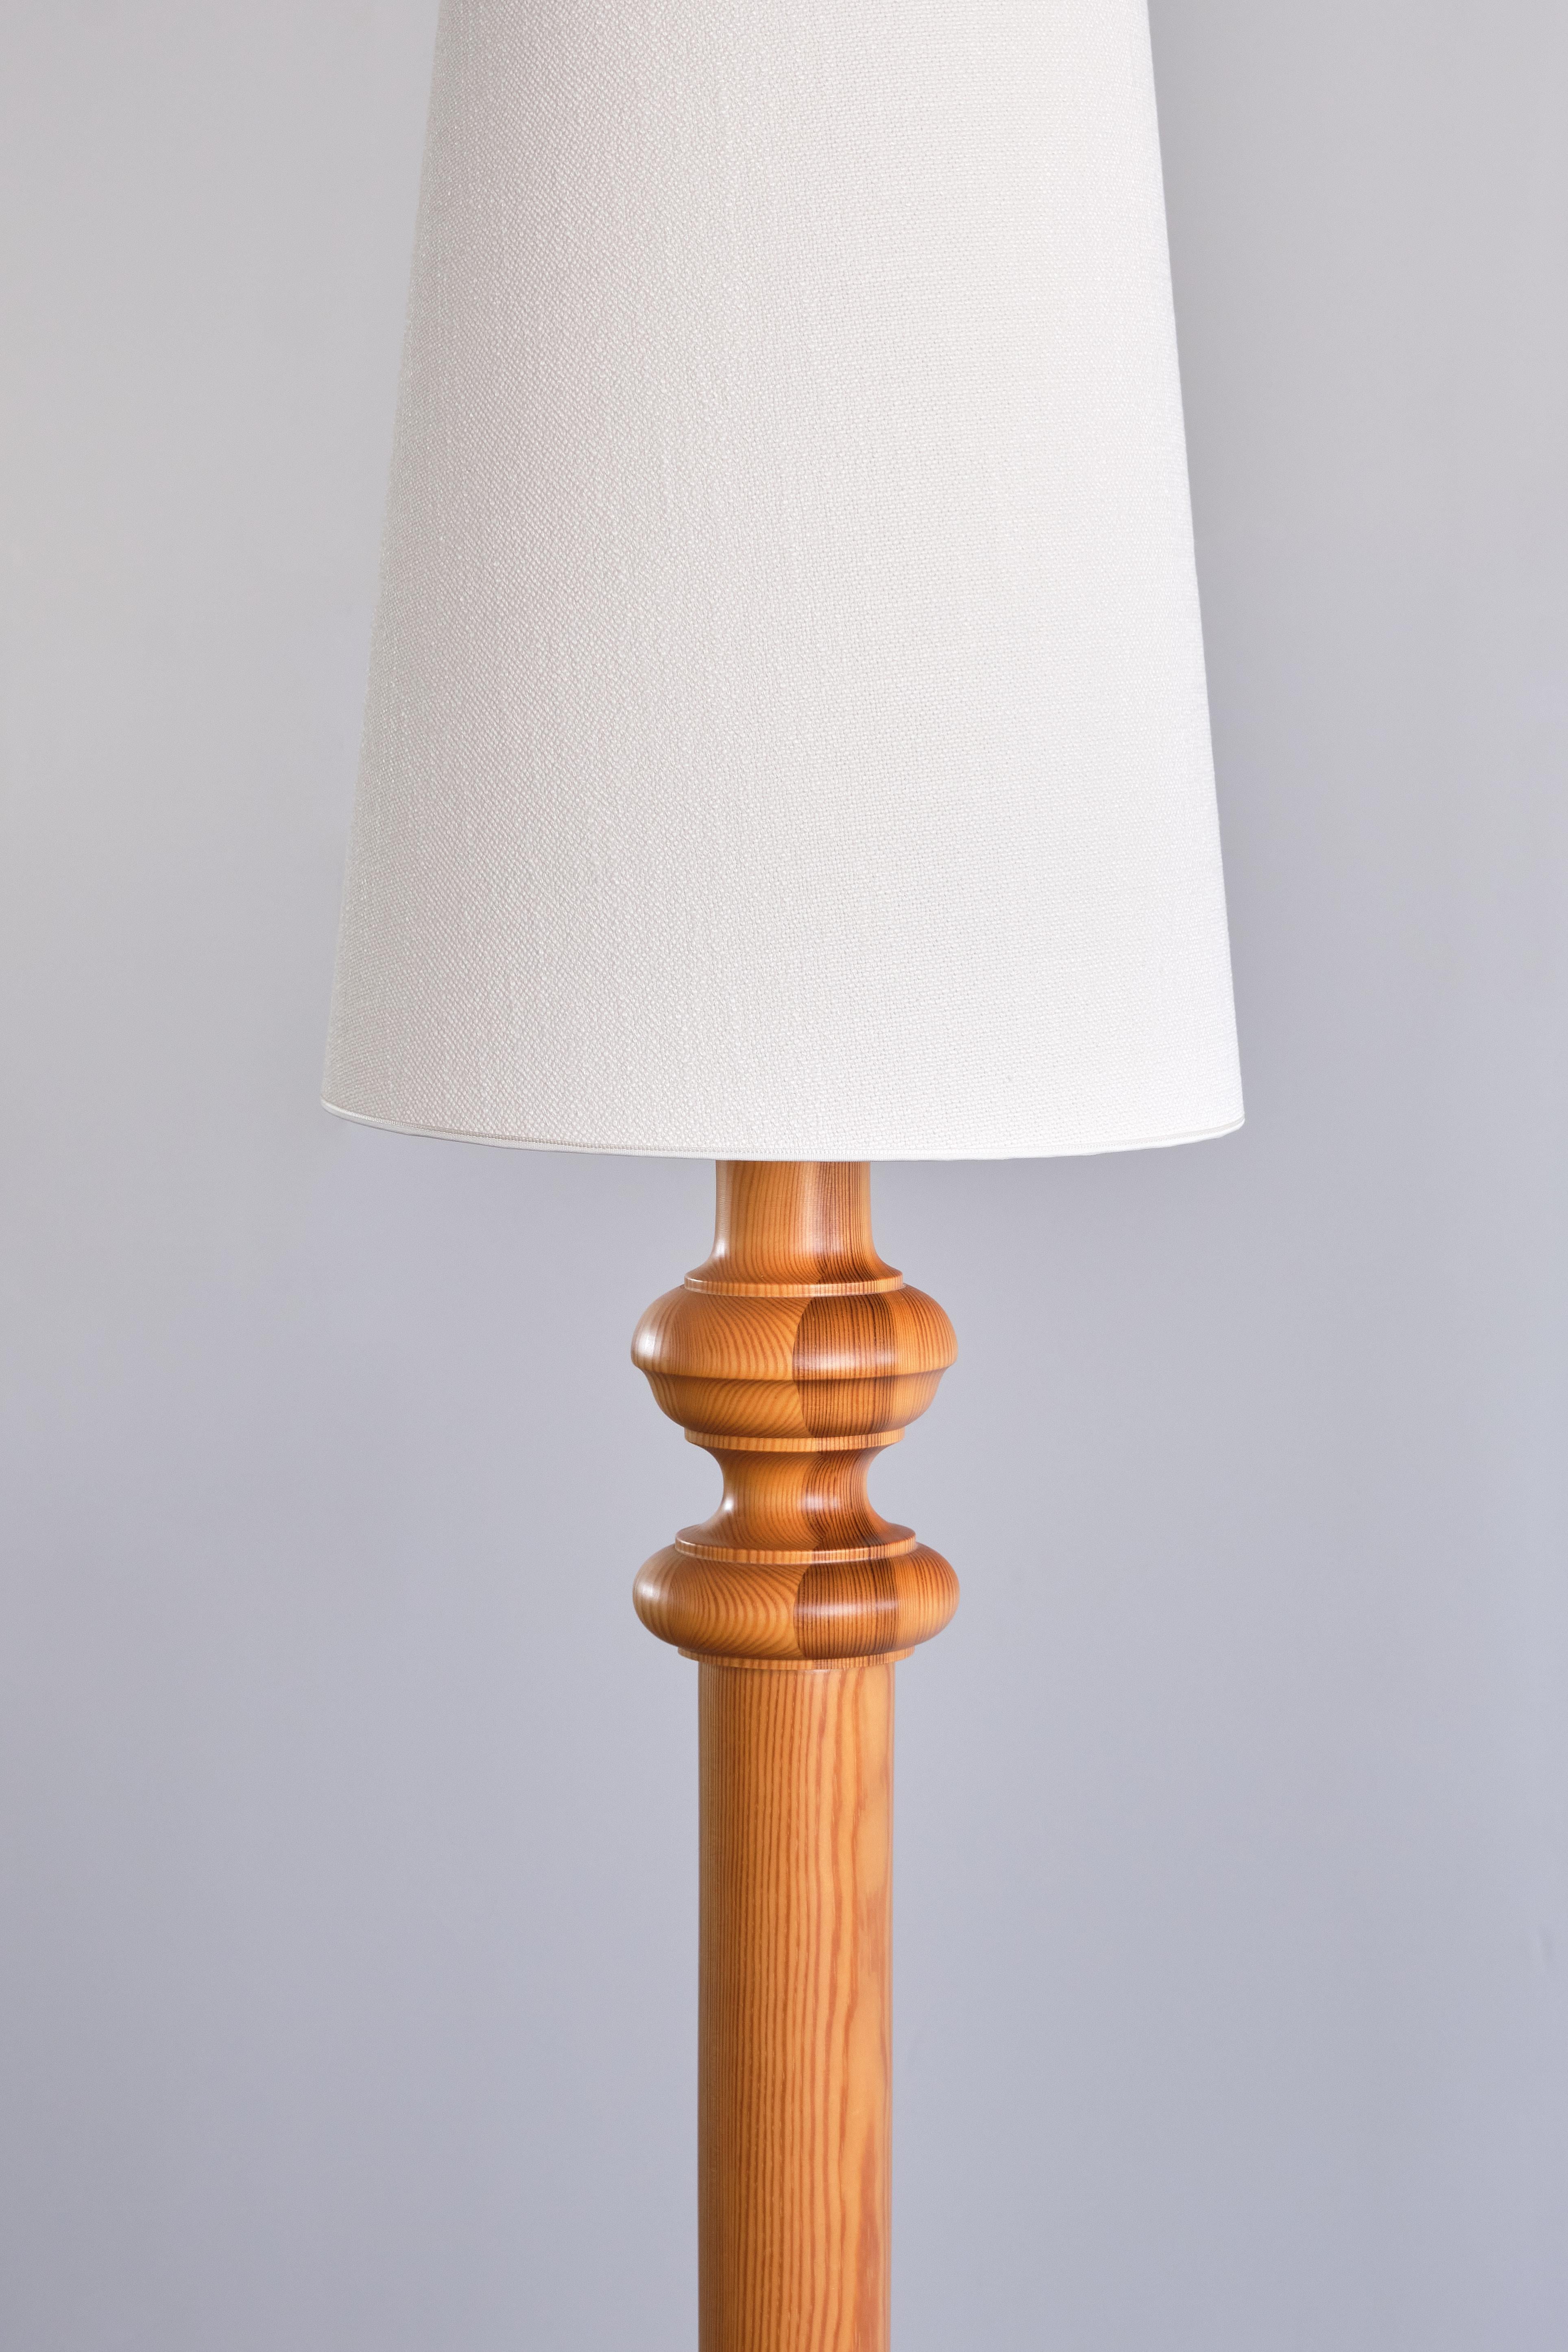 Nybro Armaturfabric Tall Floor Lamp in Solid Pine Wood, Sweden, 1960s In Good Condition For Sale In The Hague, NL